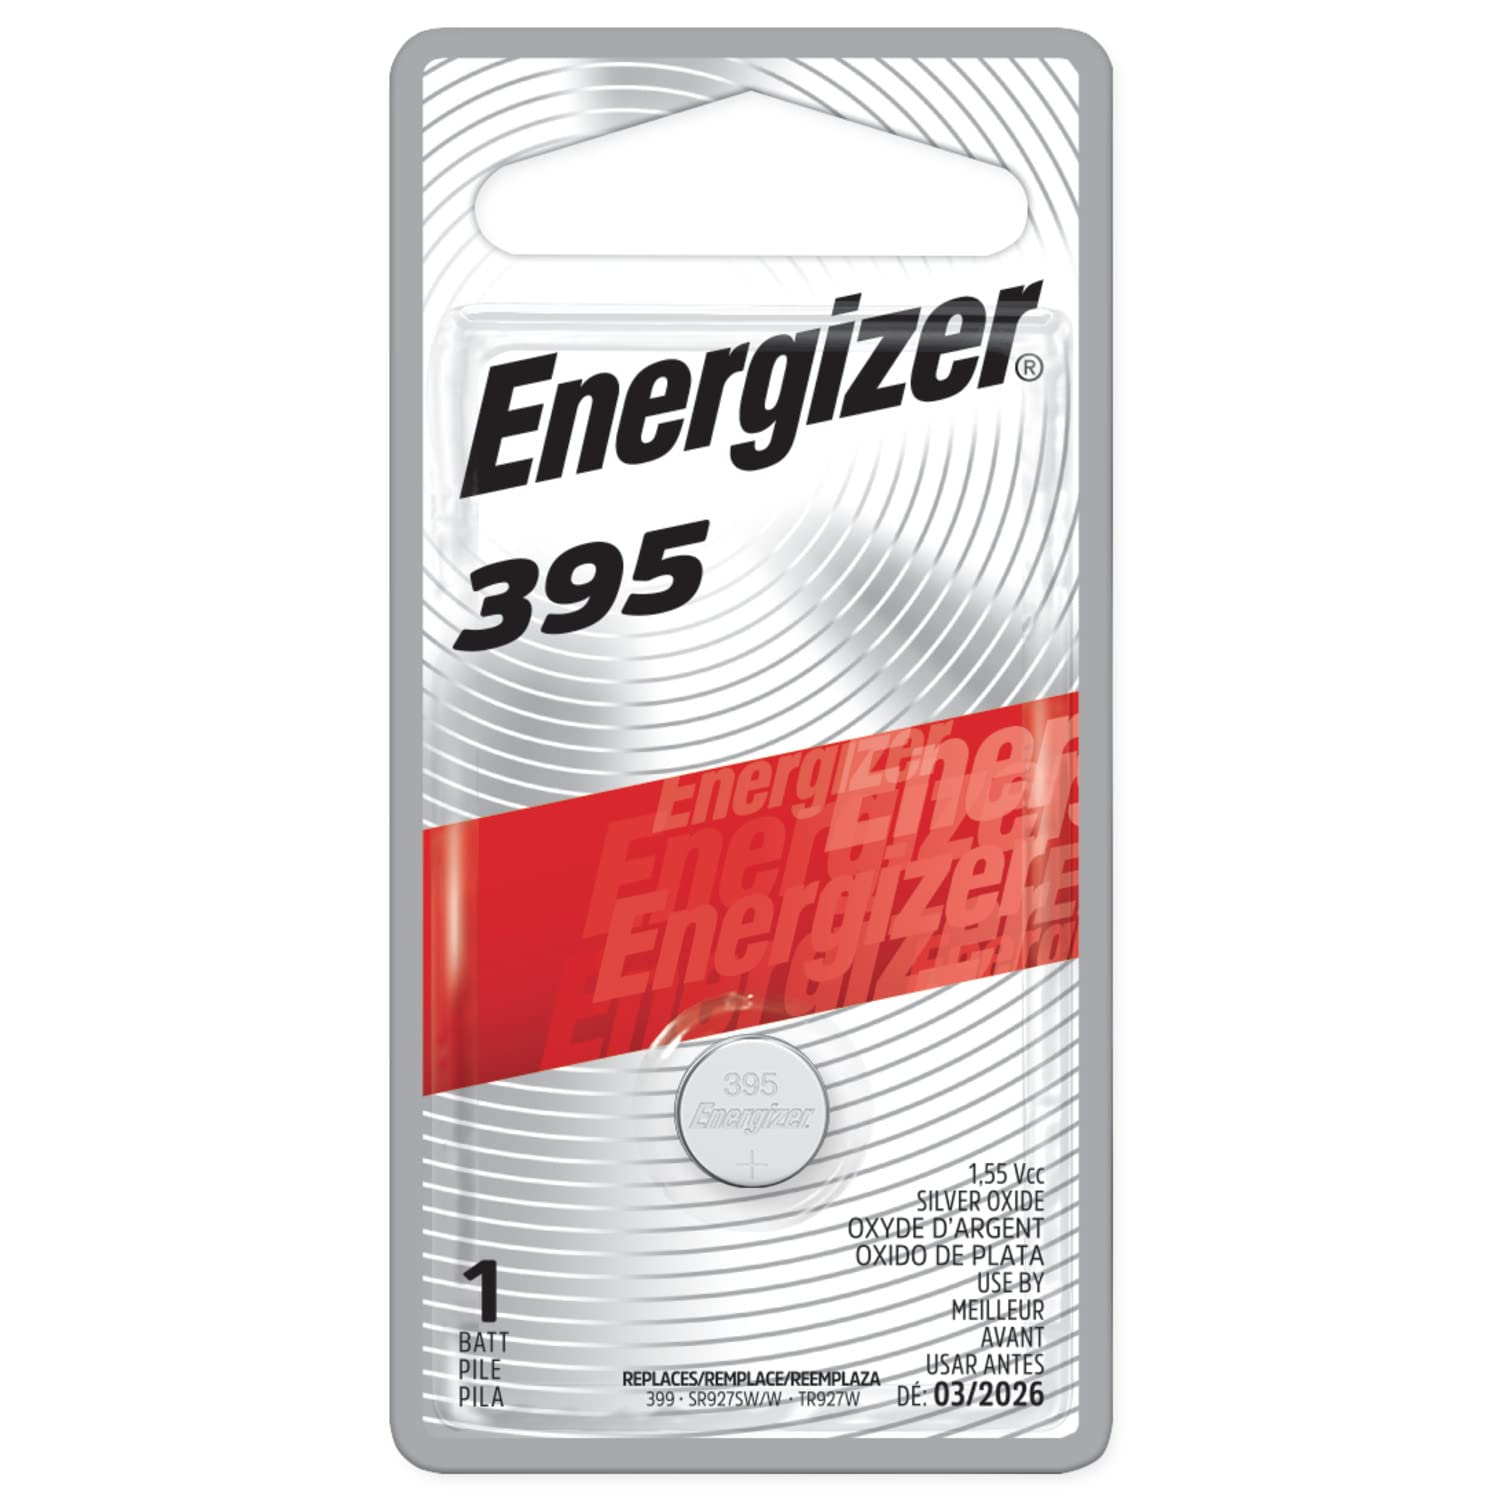 Energizer 395 Silver Oxide Button Battery, 1 Pack